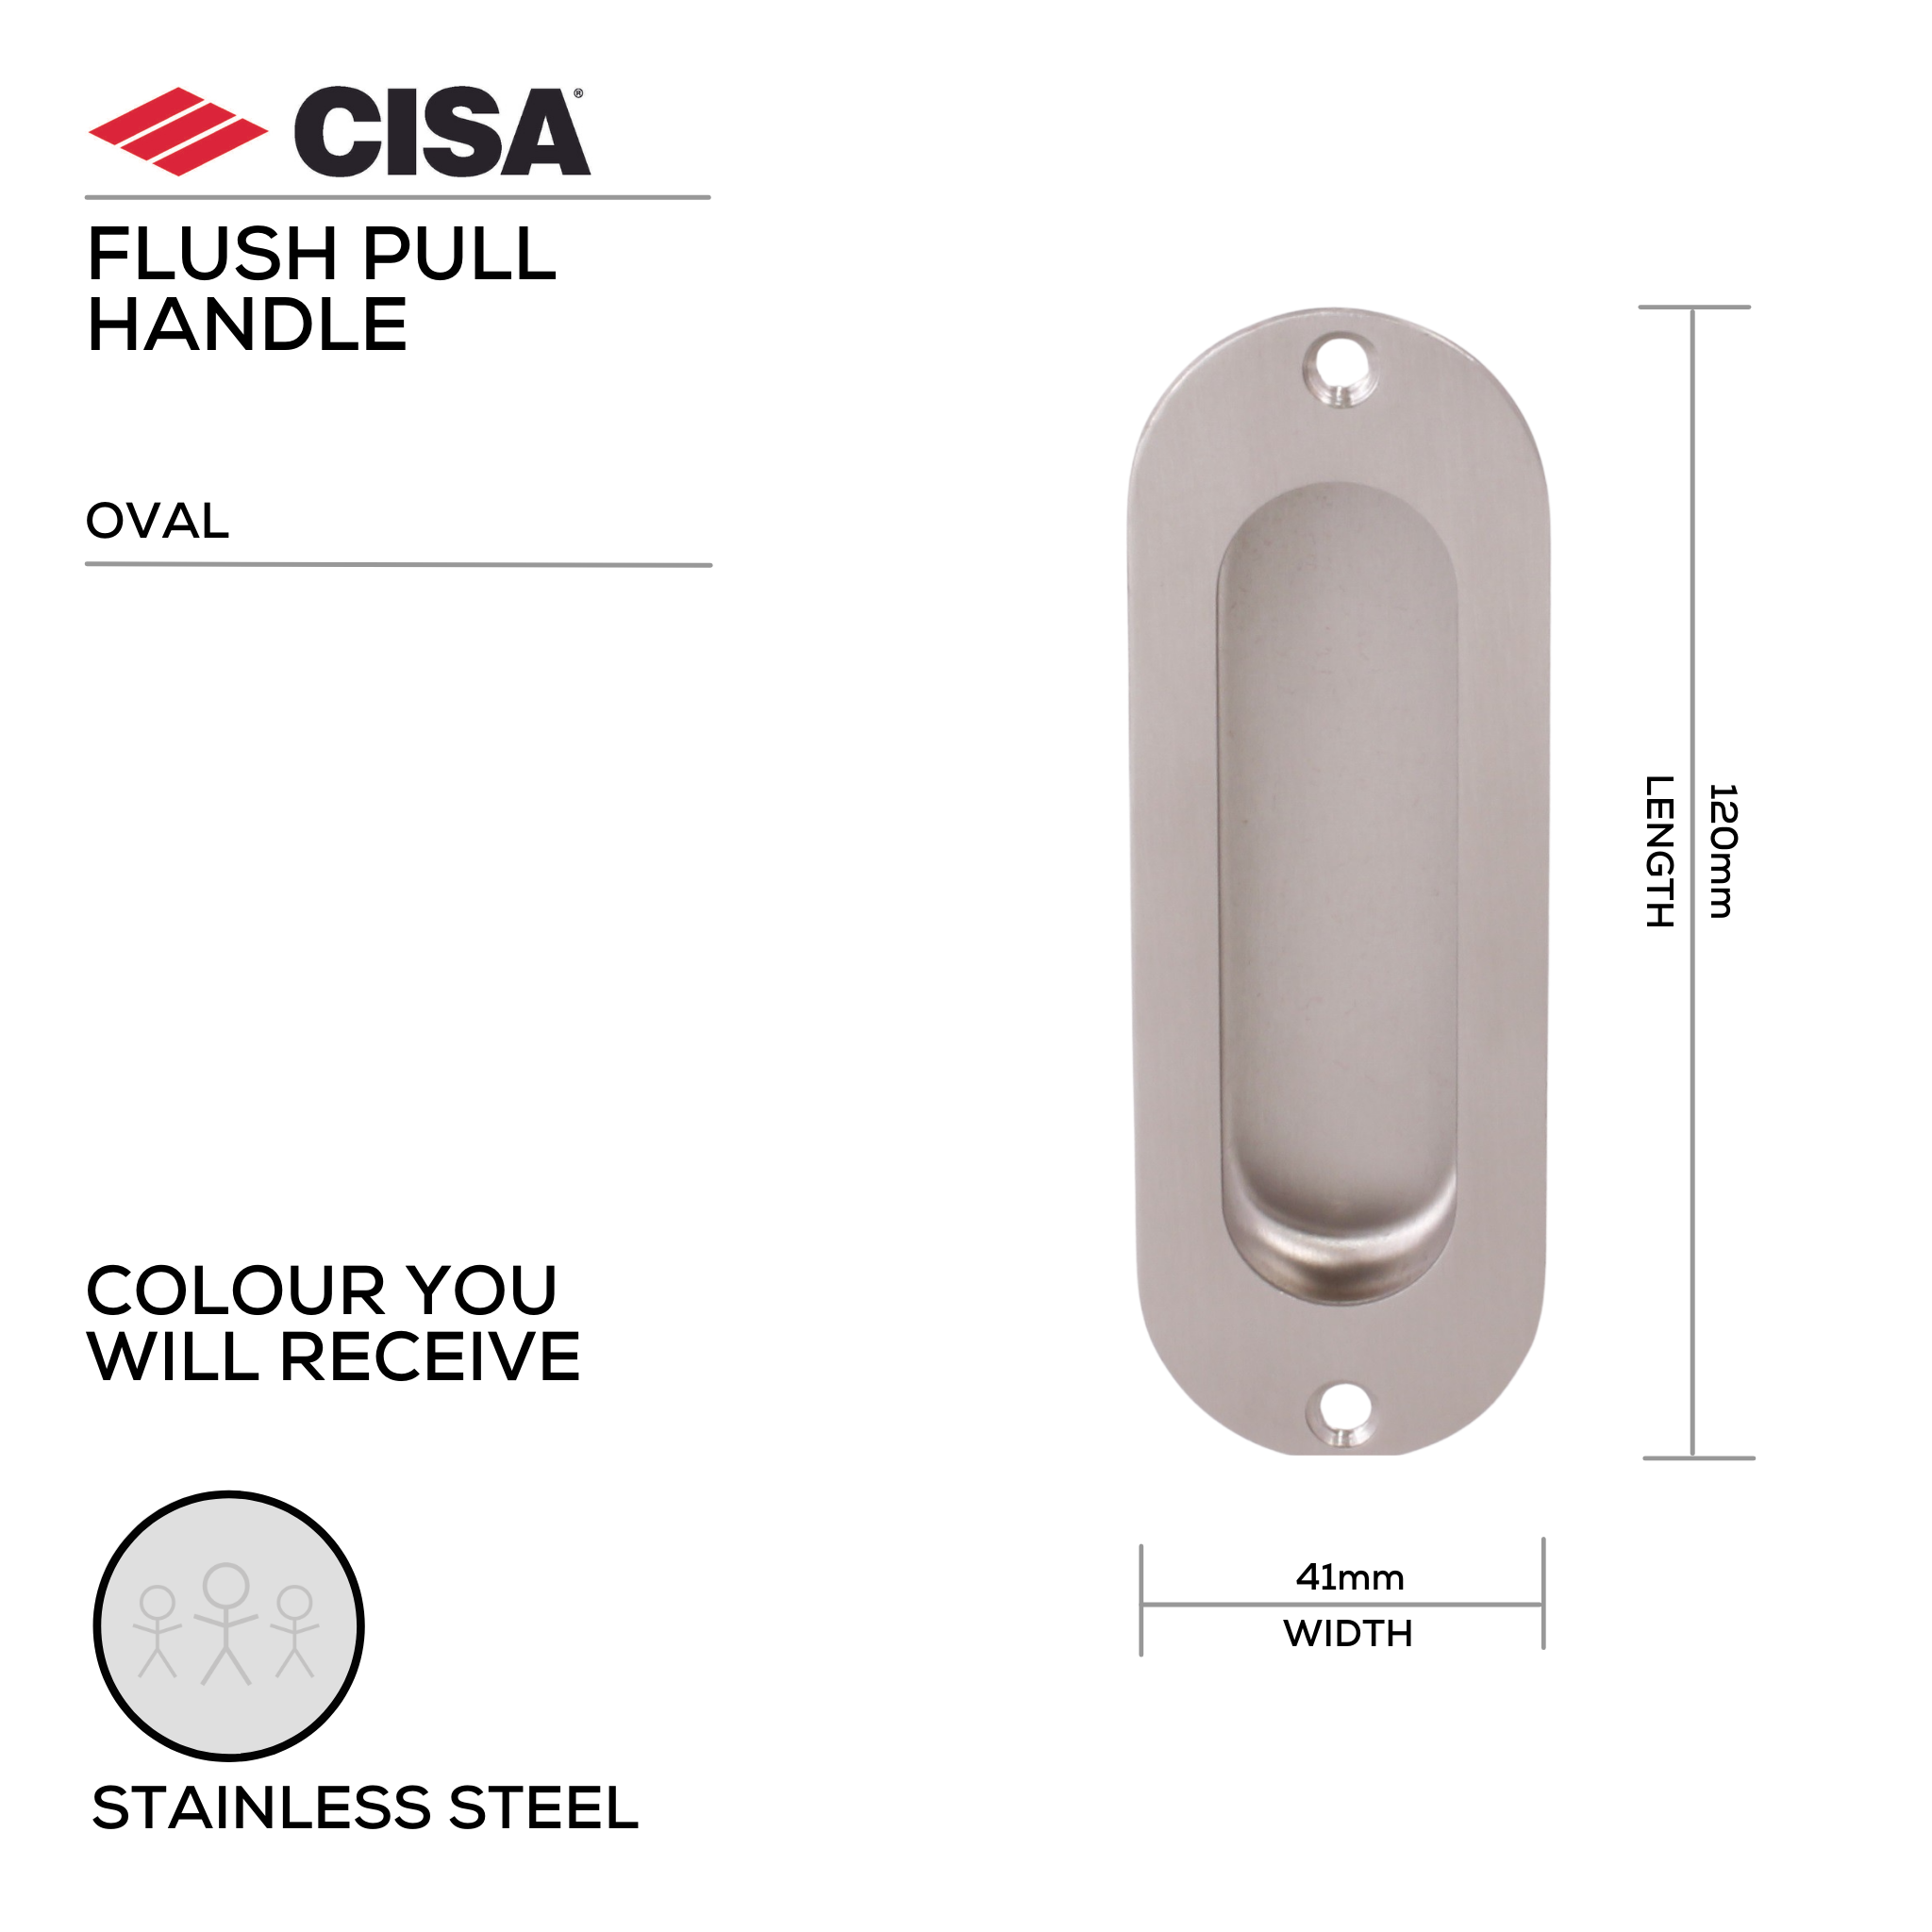 FP02.SS, Flush Pull, Oval, 120mm (l) x 41mm (w), Stainless Steel, CISA